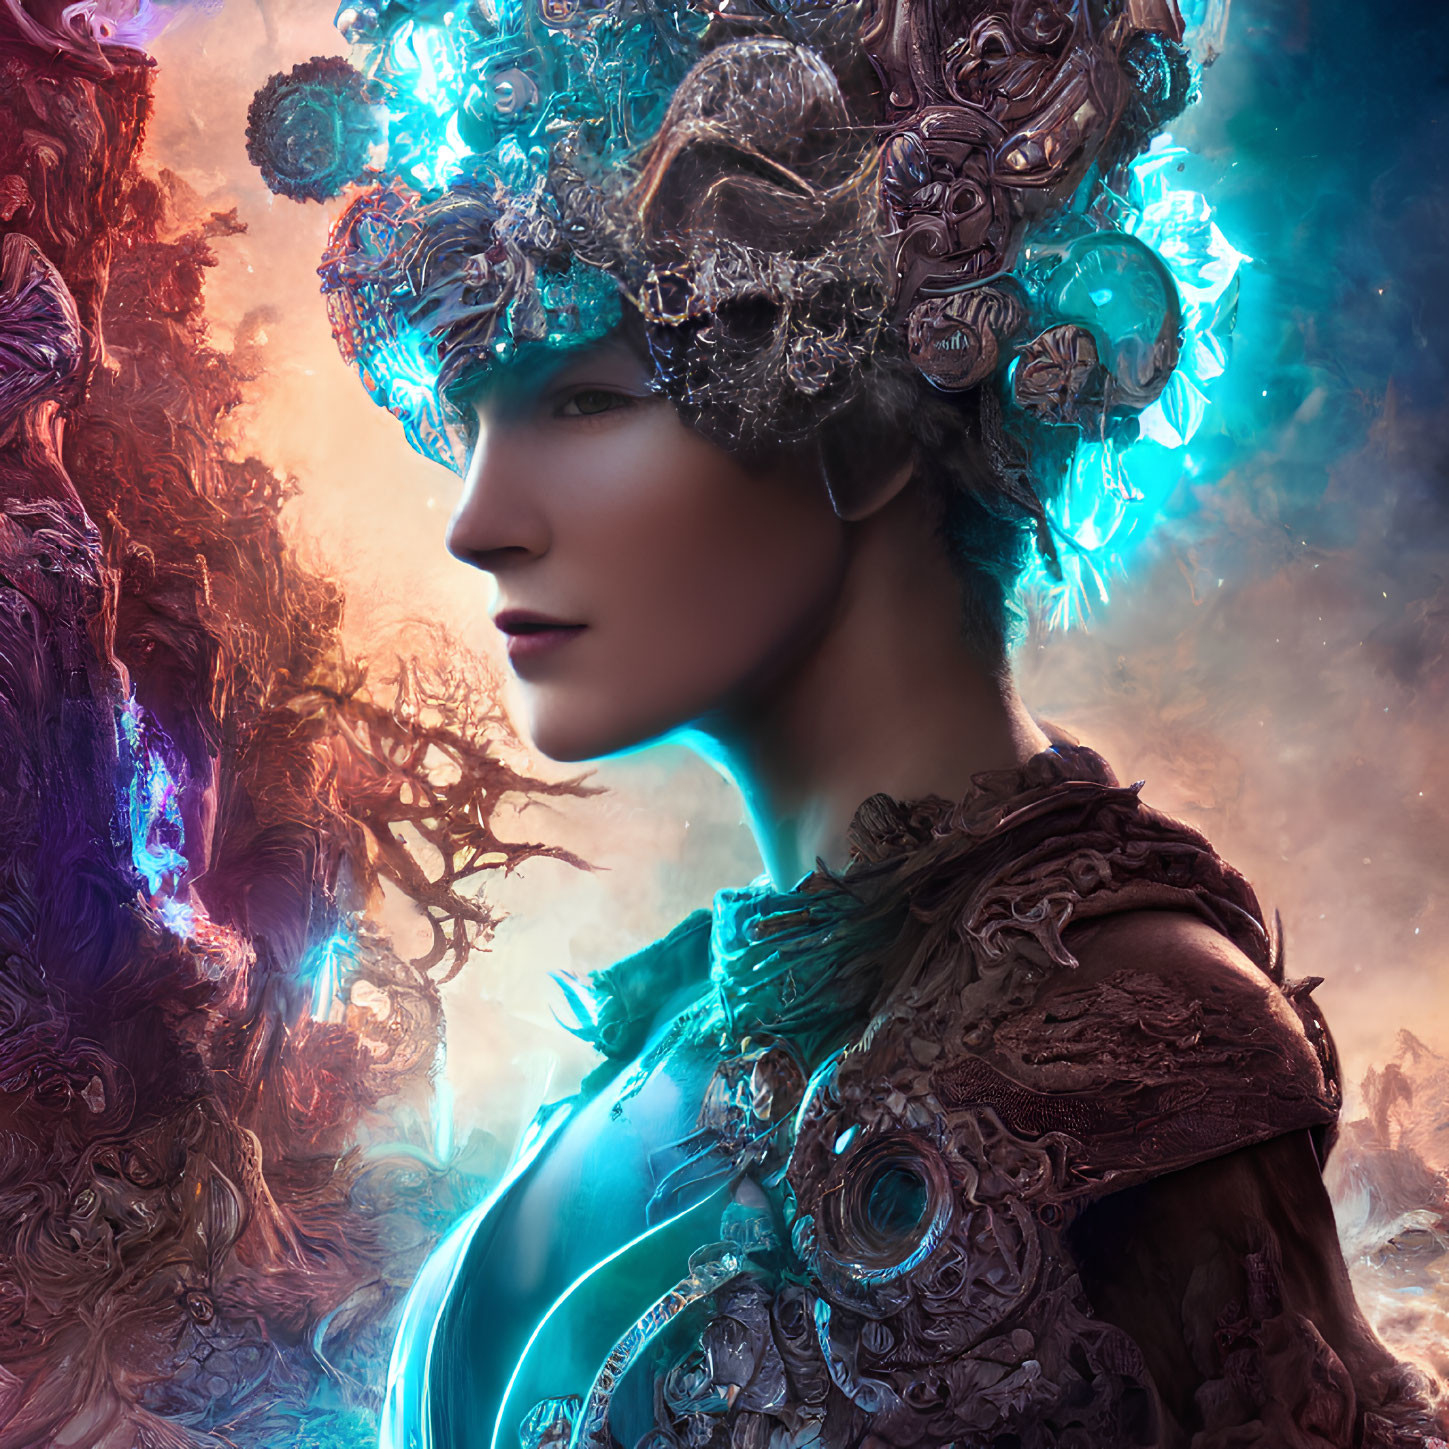 Profile view of person with intricate metallic headpiece and glowing blue light.